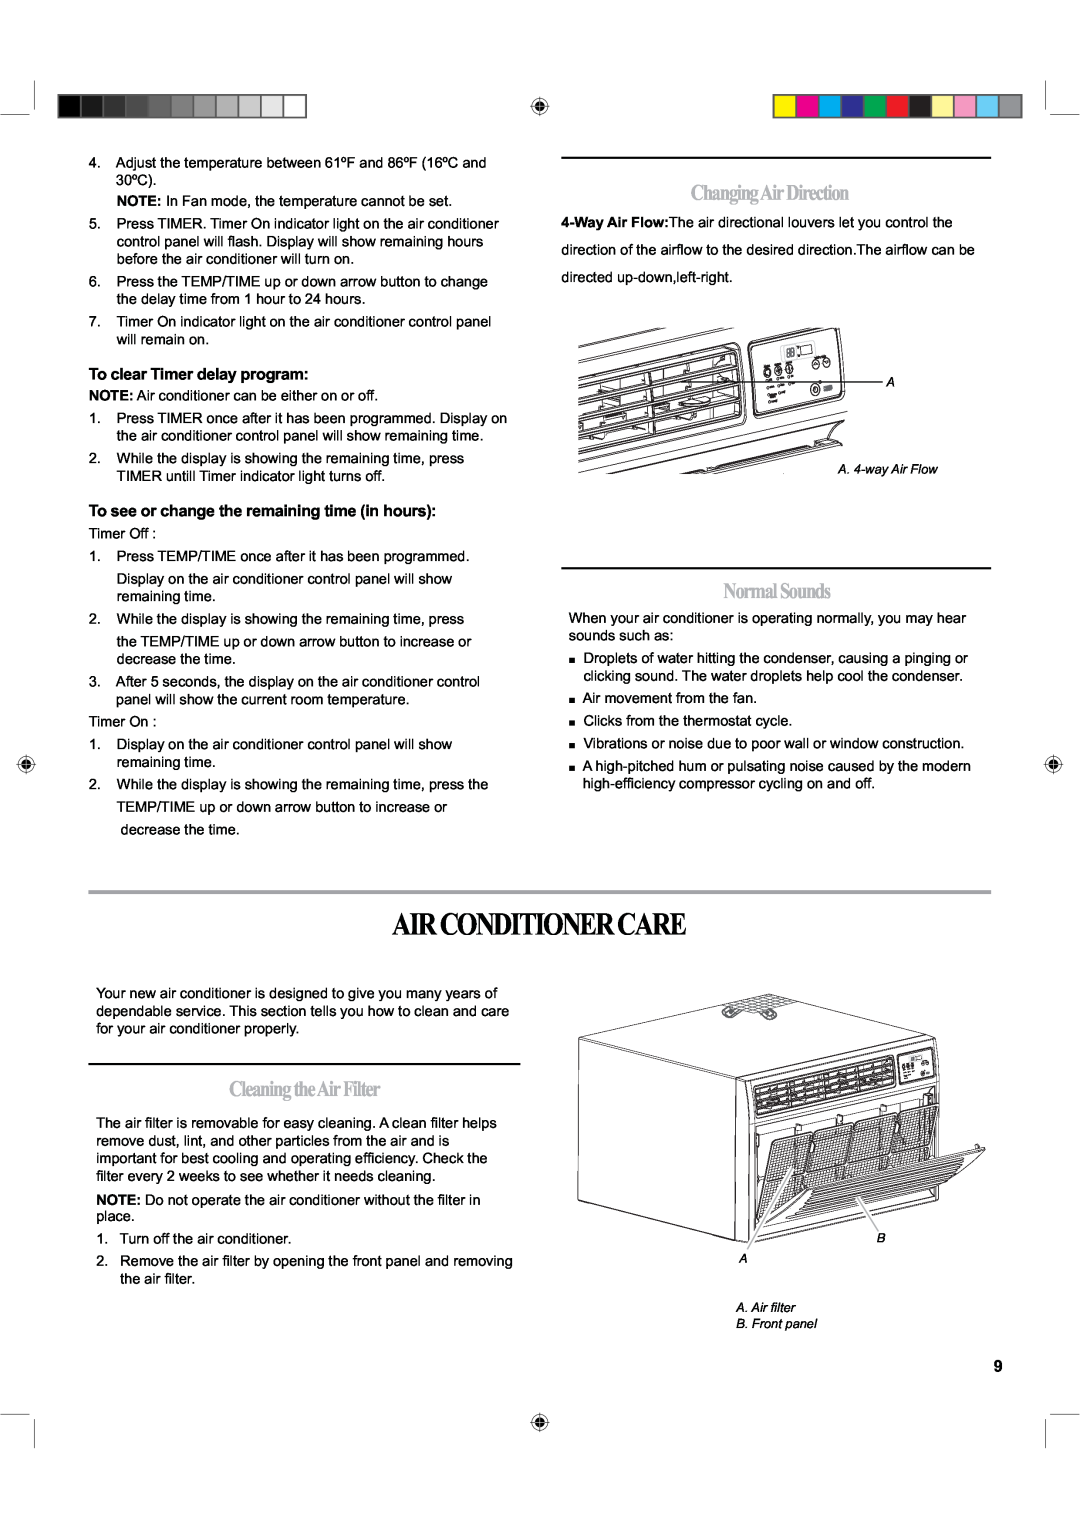 Haier HTWR10VCK Airconditionercare, ChangingAirDirection, NormalSounds, CleaningtheAirFilter, To clear Timer delay program 